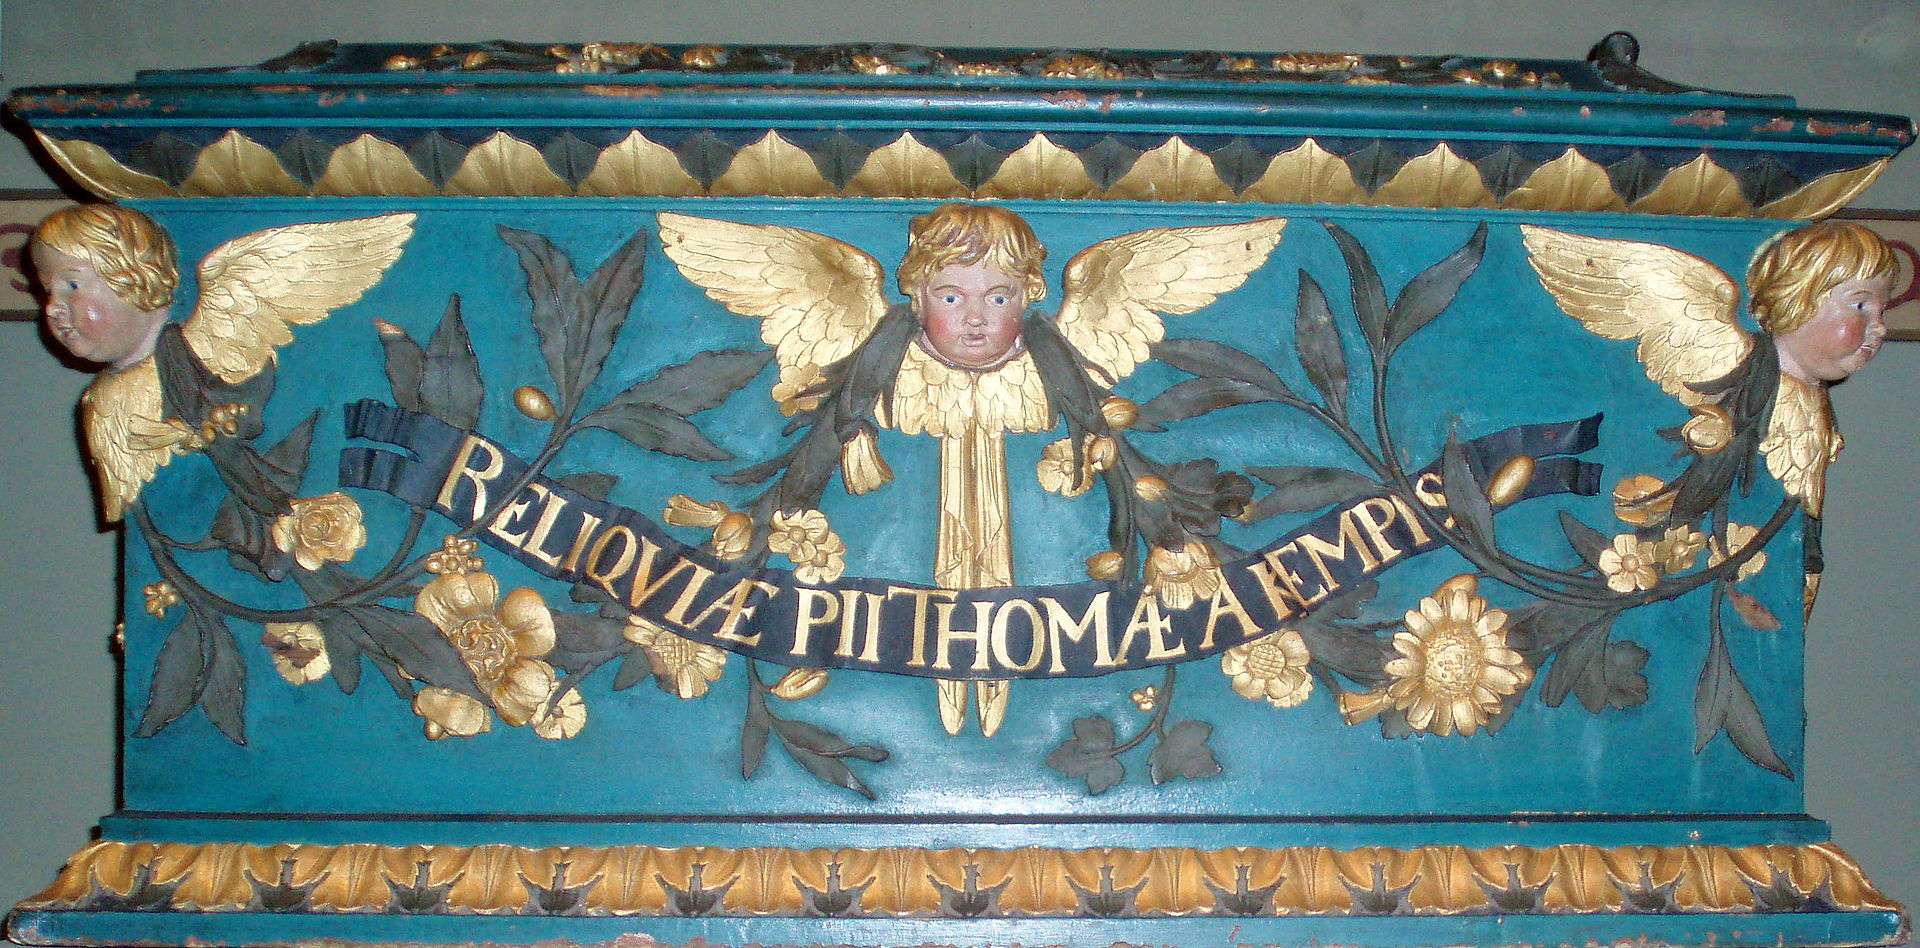 The reliquary with the relics of Thomas à Kempis